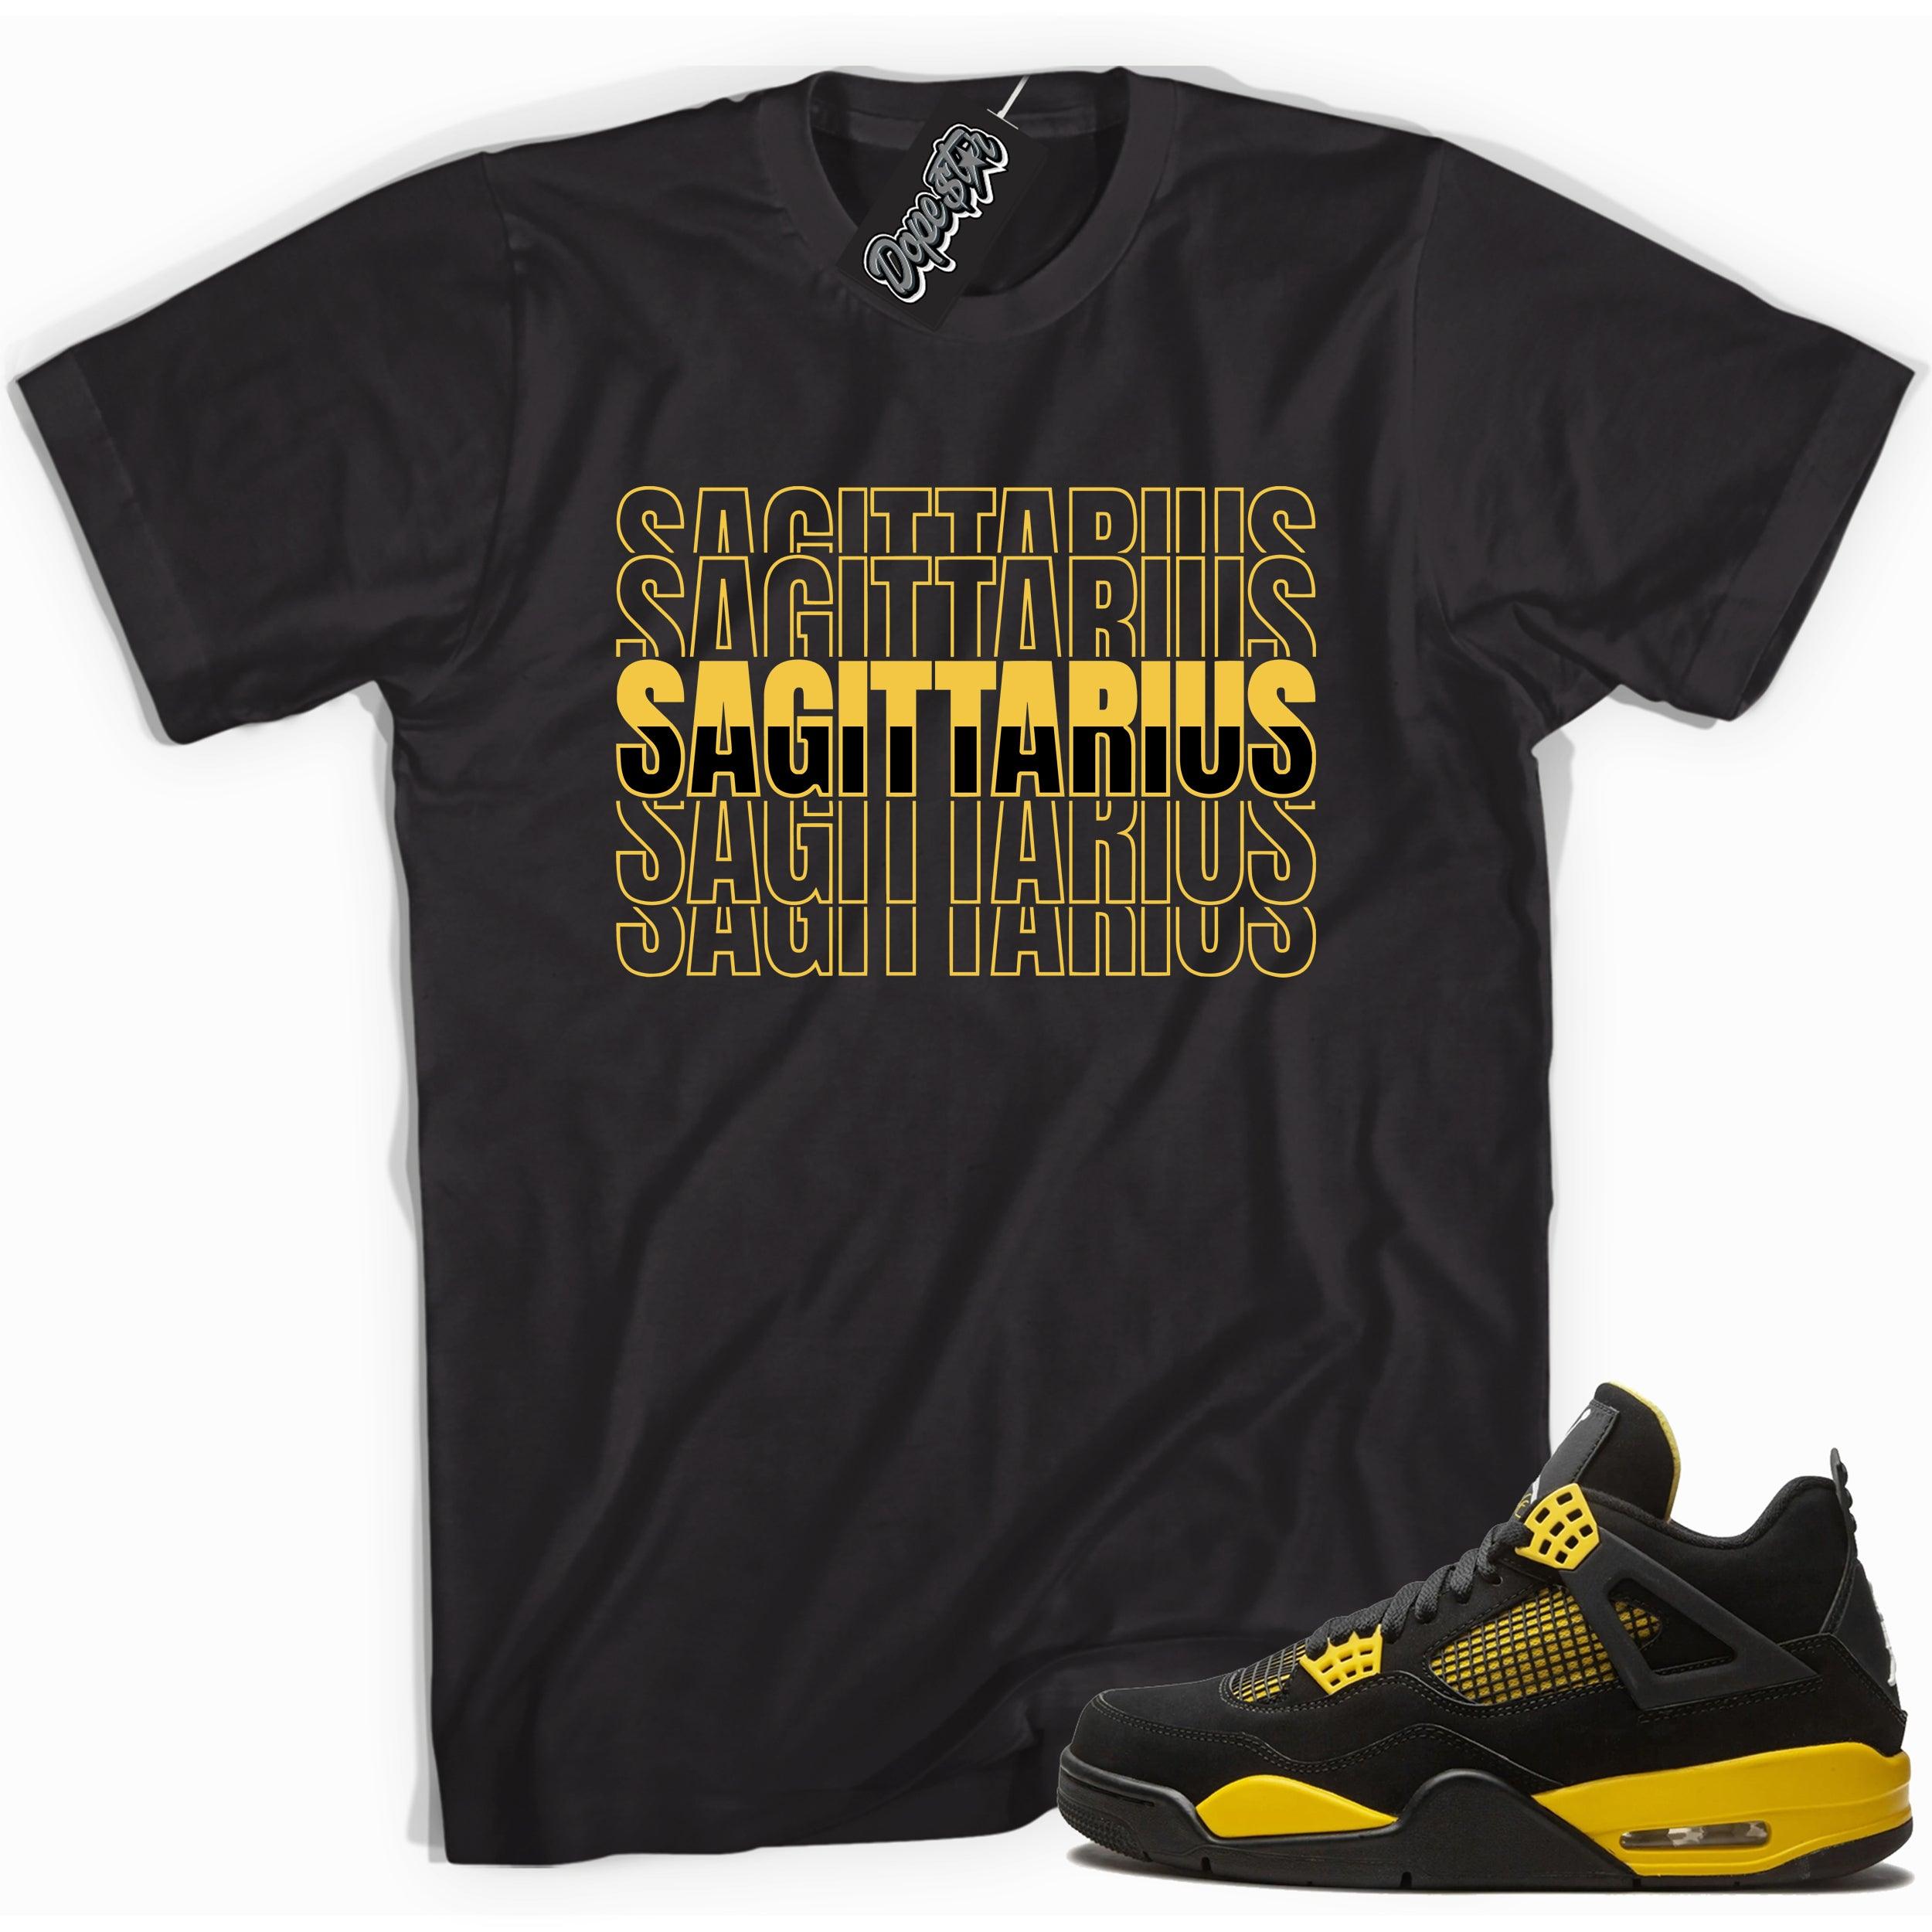 Cool black graphic tee with 'Sagittarius ' print, that perfectly matches  Air Jordan 4 Thunder sneakers